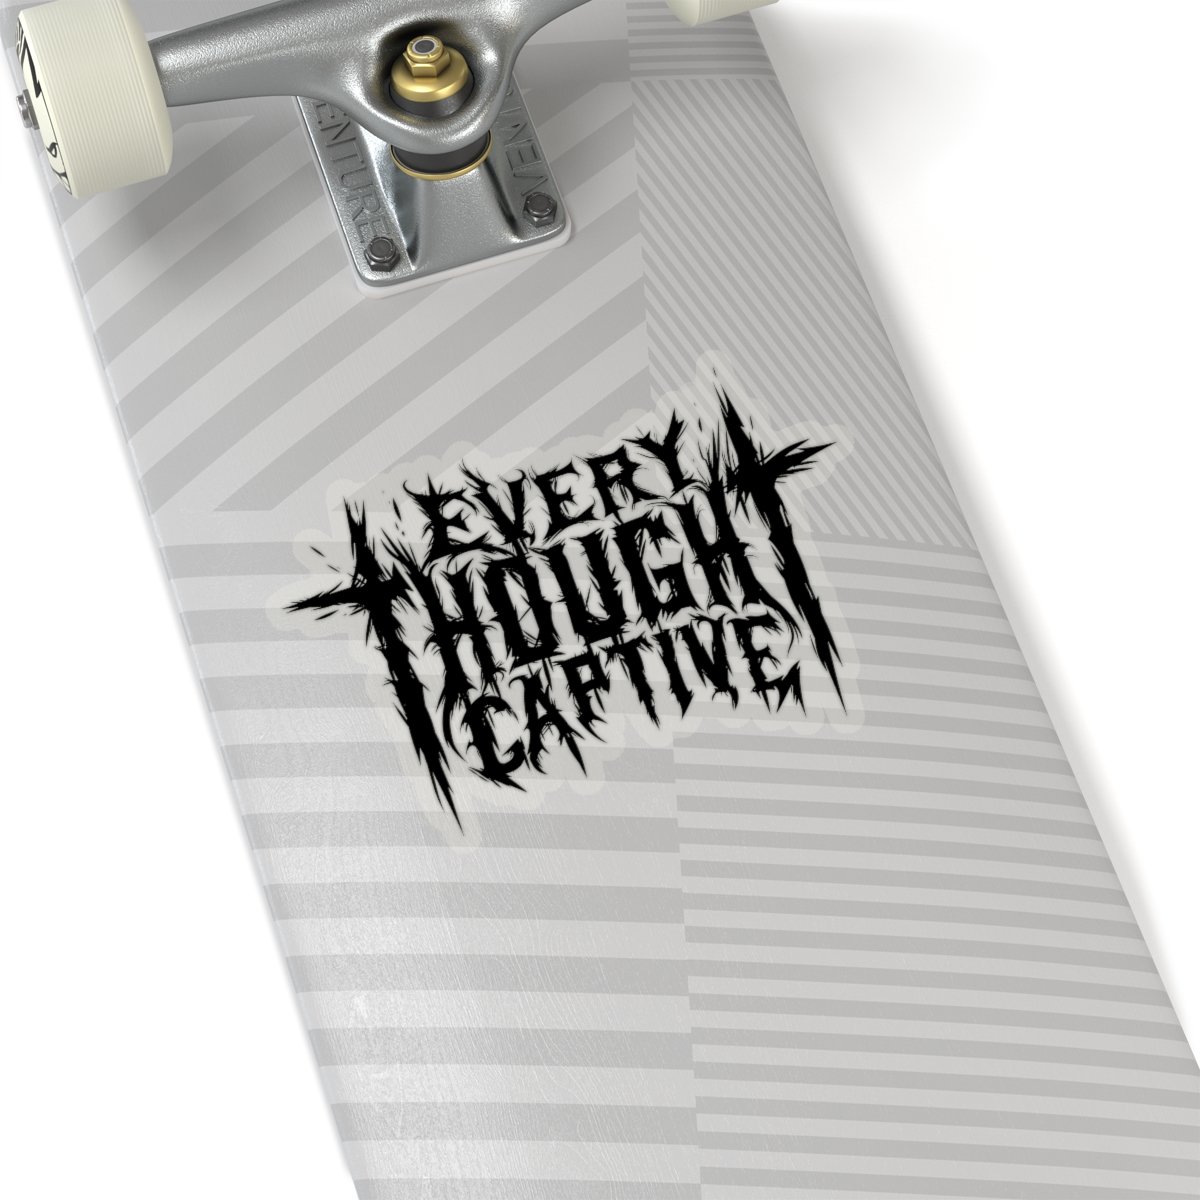 Every Thought Captive (Black) Die Cut Stickers